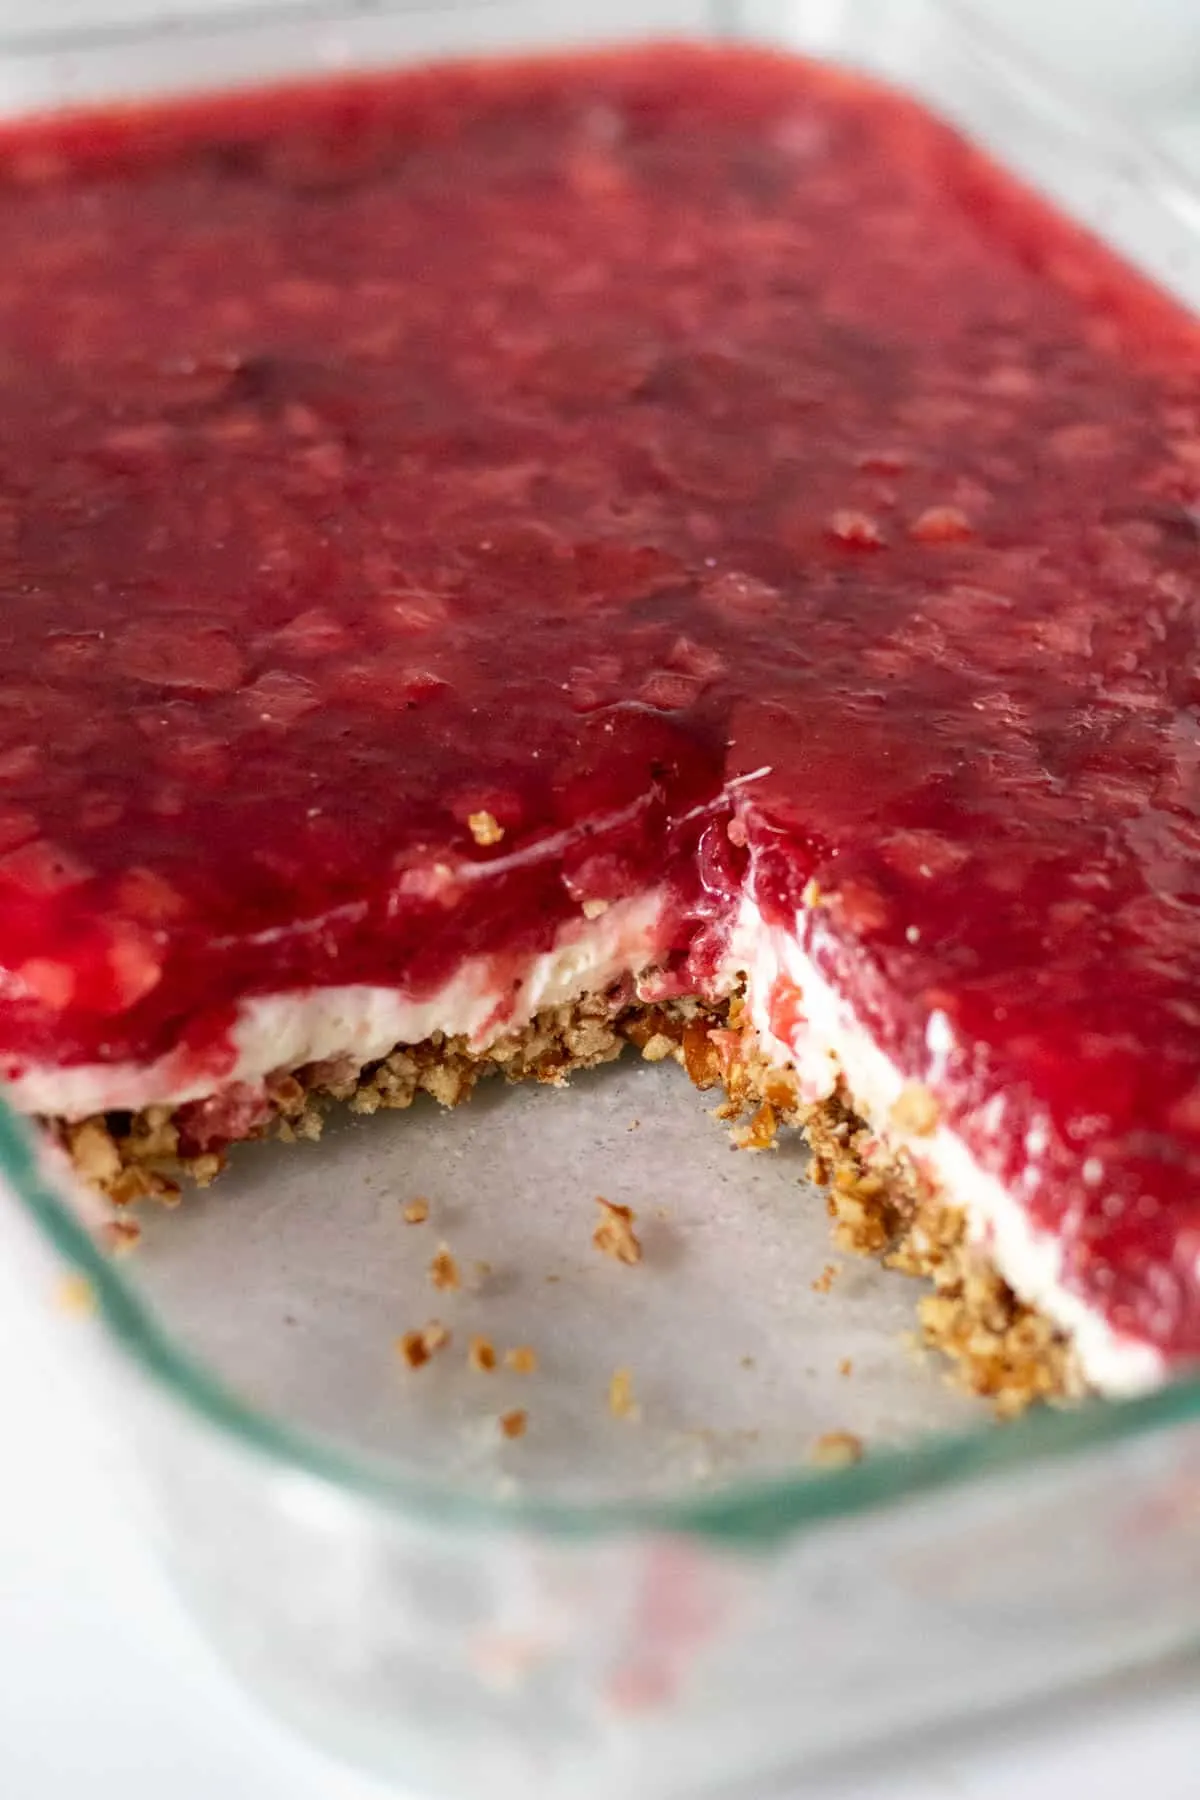 Glass baking dish of strawberry pretzel salad with section cut out showing the layers.